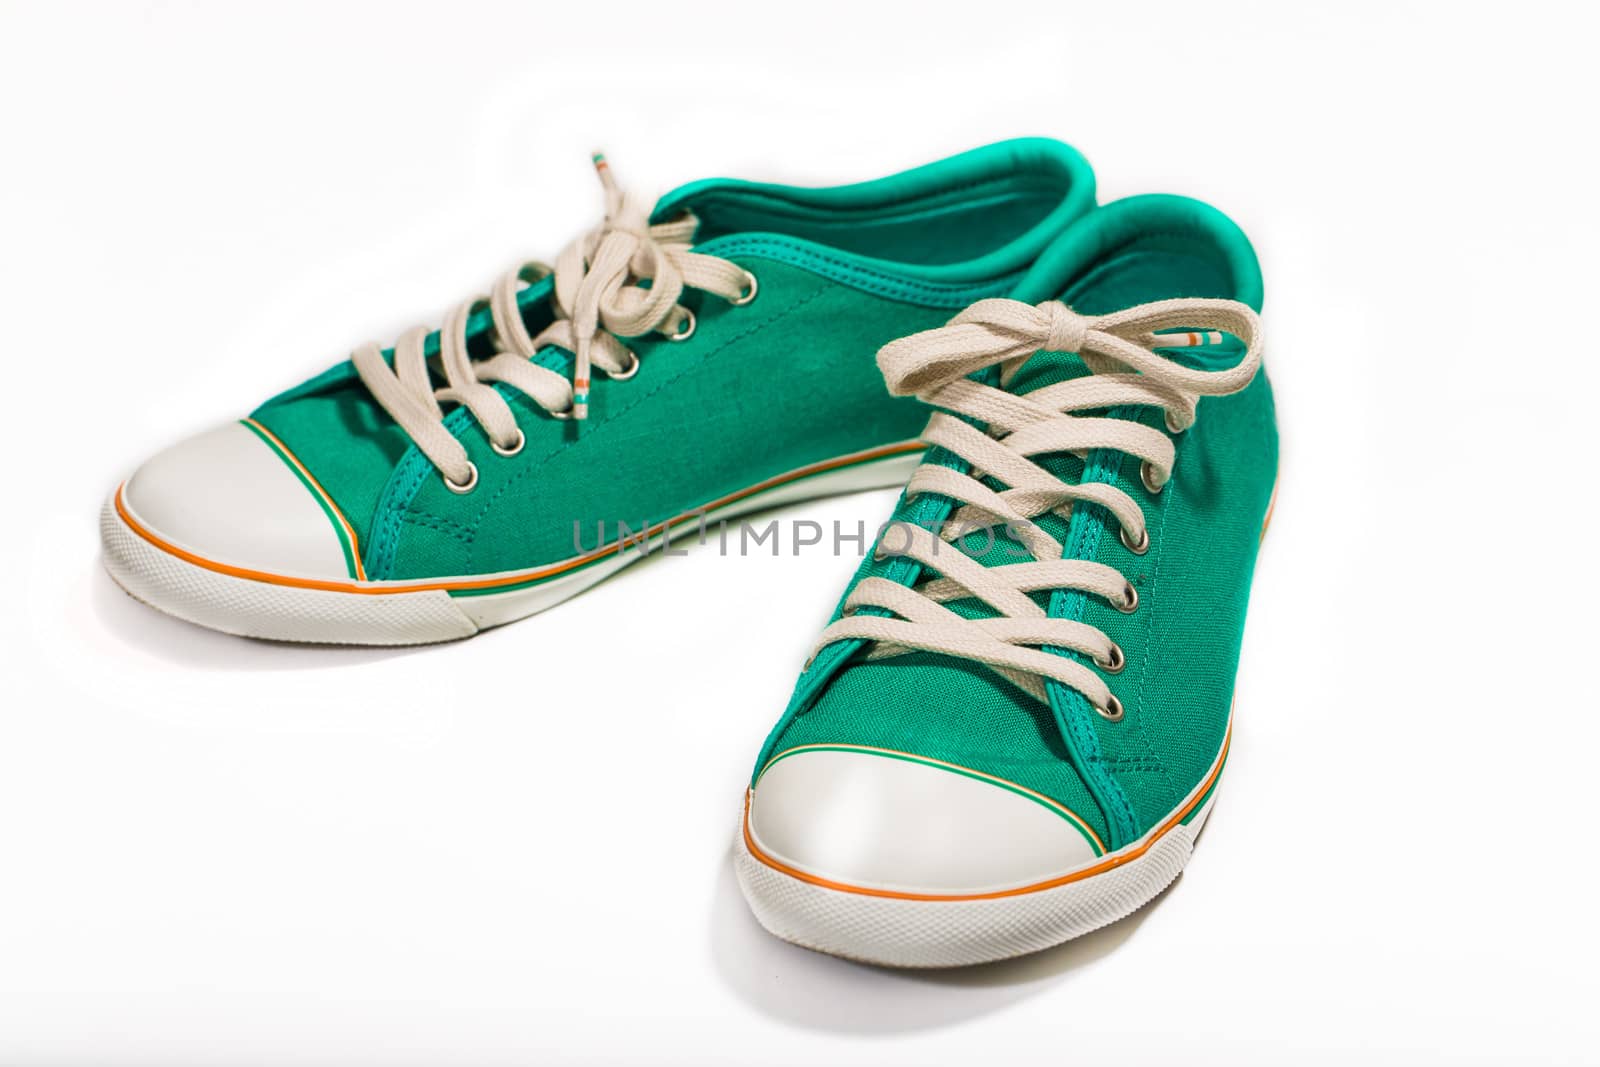 vintage green shoes on white background